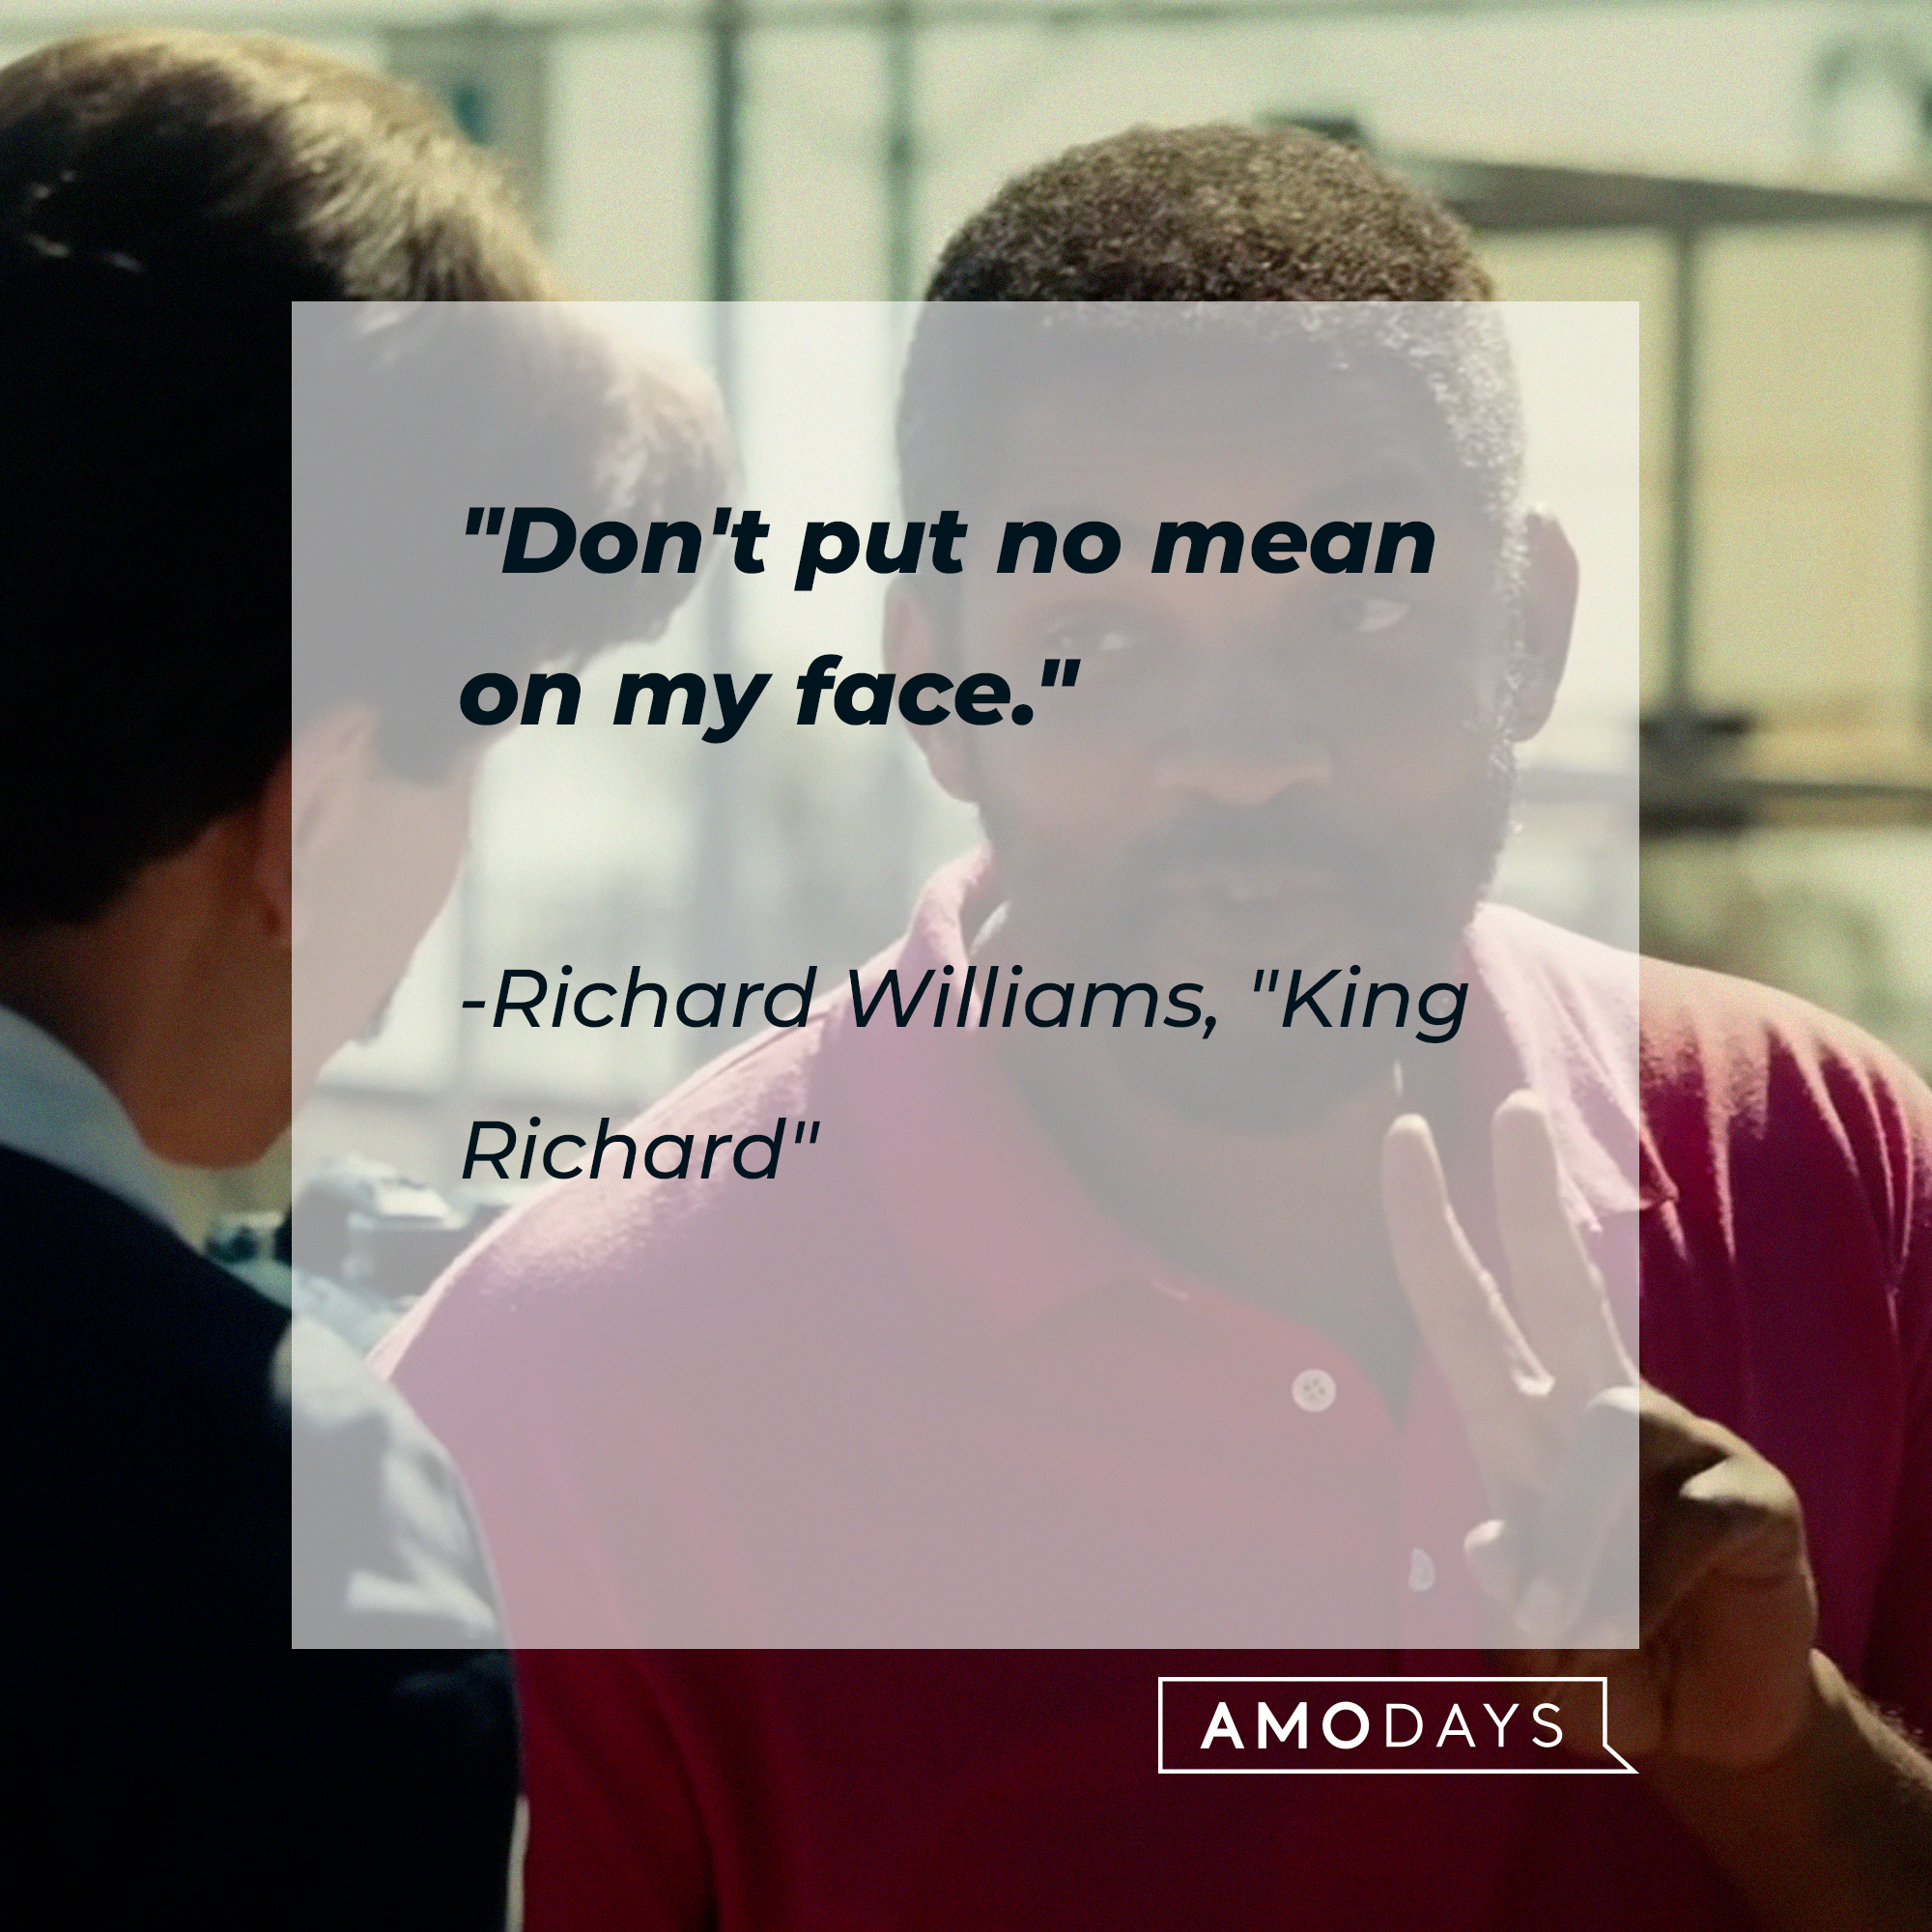 Richard Williams‘ quote: "Don't put no mean on my face." | Image: youtube.com/WarnerBrosPictures